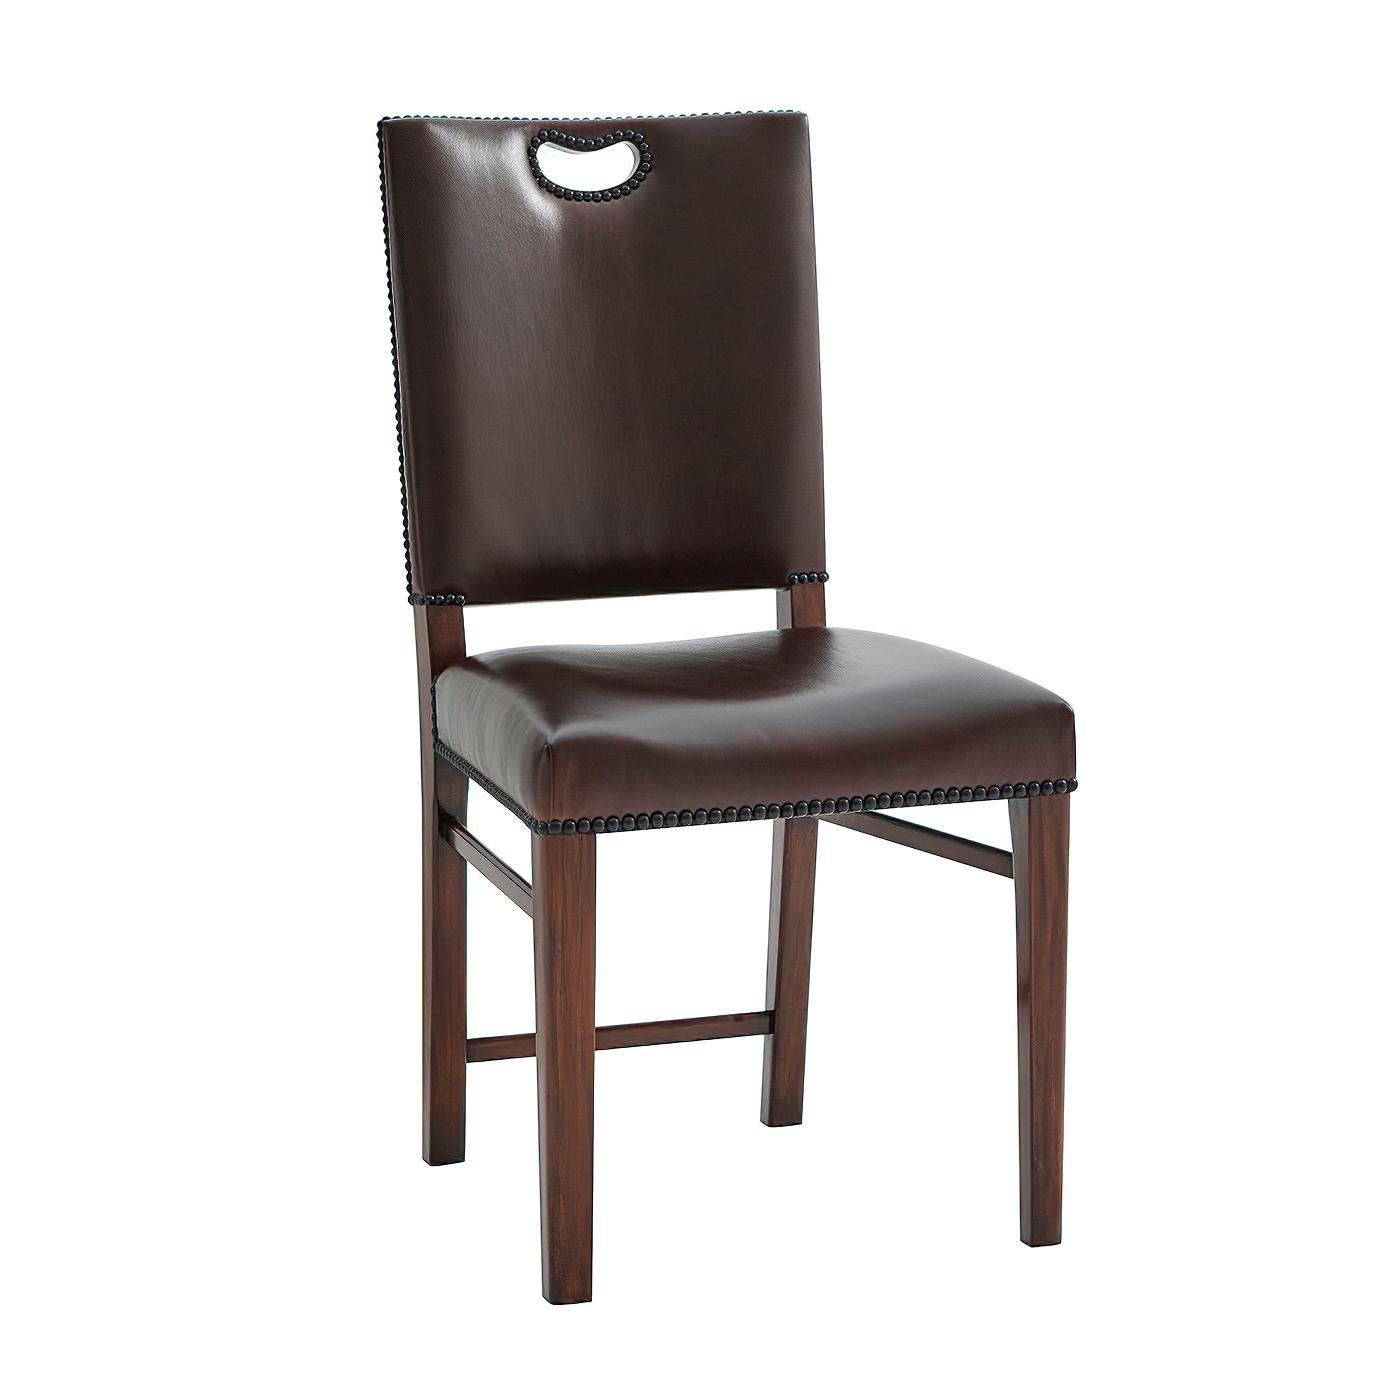 A Campaign side chair, the padded rectangular back with a pierced carrying handle above an upholstered seat on square tapering legs joined by stretchers. Inspired by a 19th century English original.

Dimensions: 19